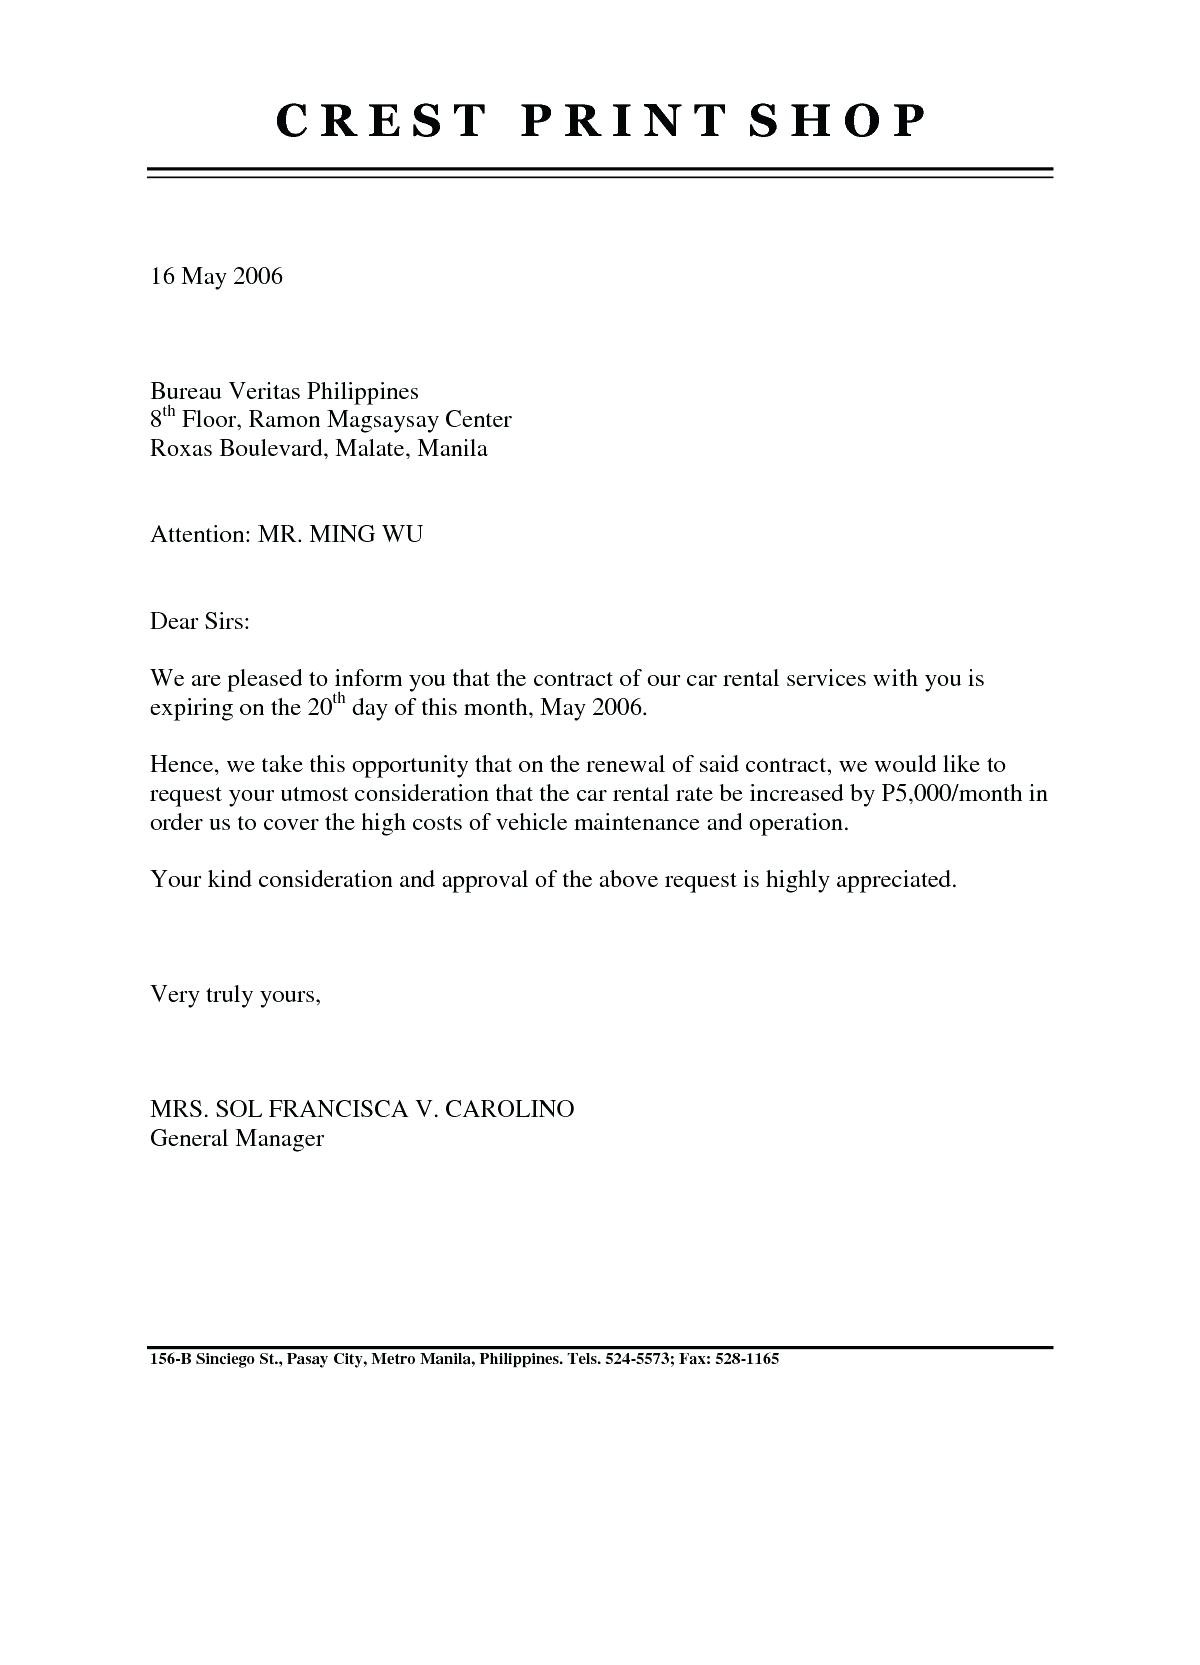 Cancel Service Contract Letter Template - 20 Inspirational Terminate Tenancy Agreement Letter Sample